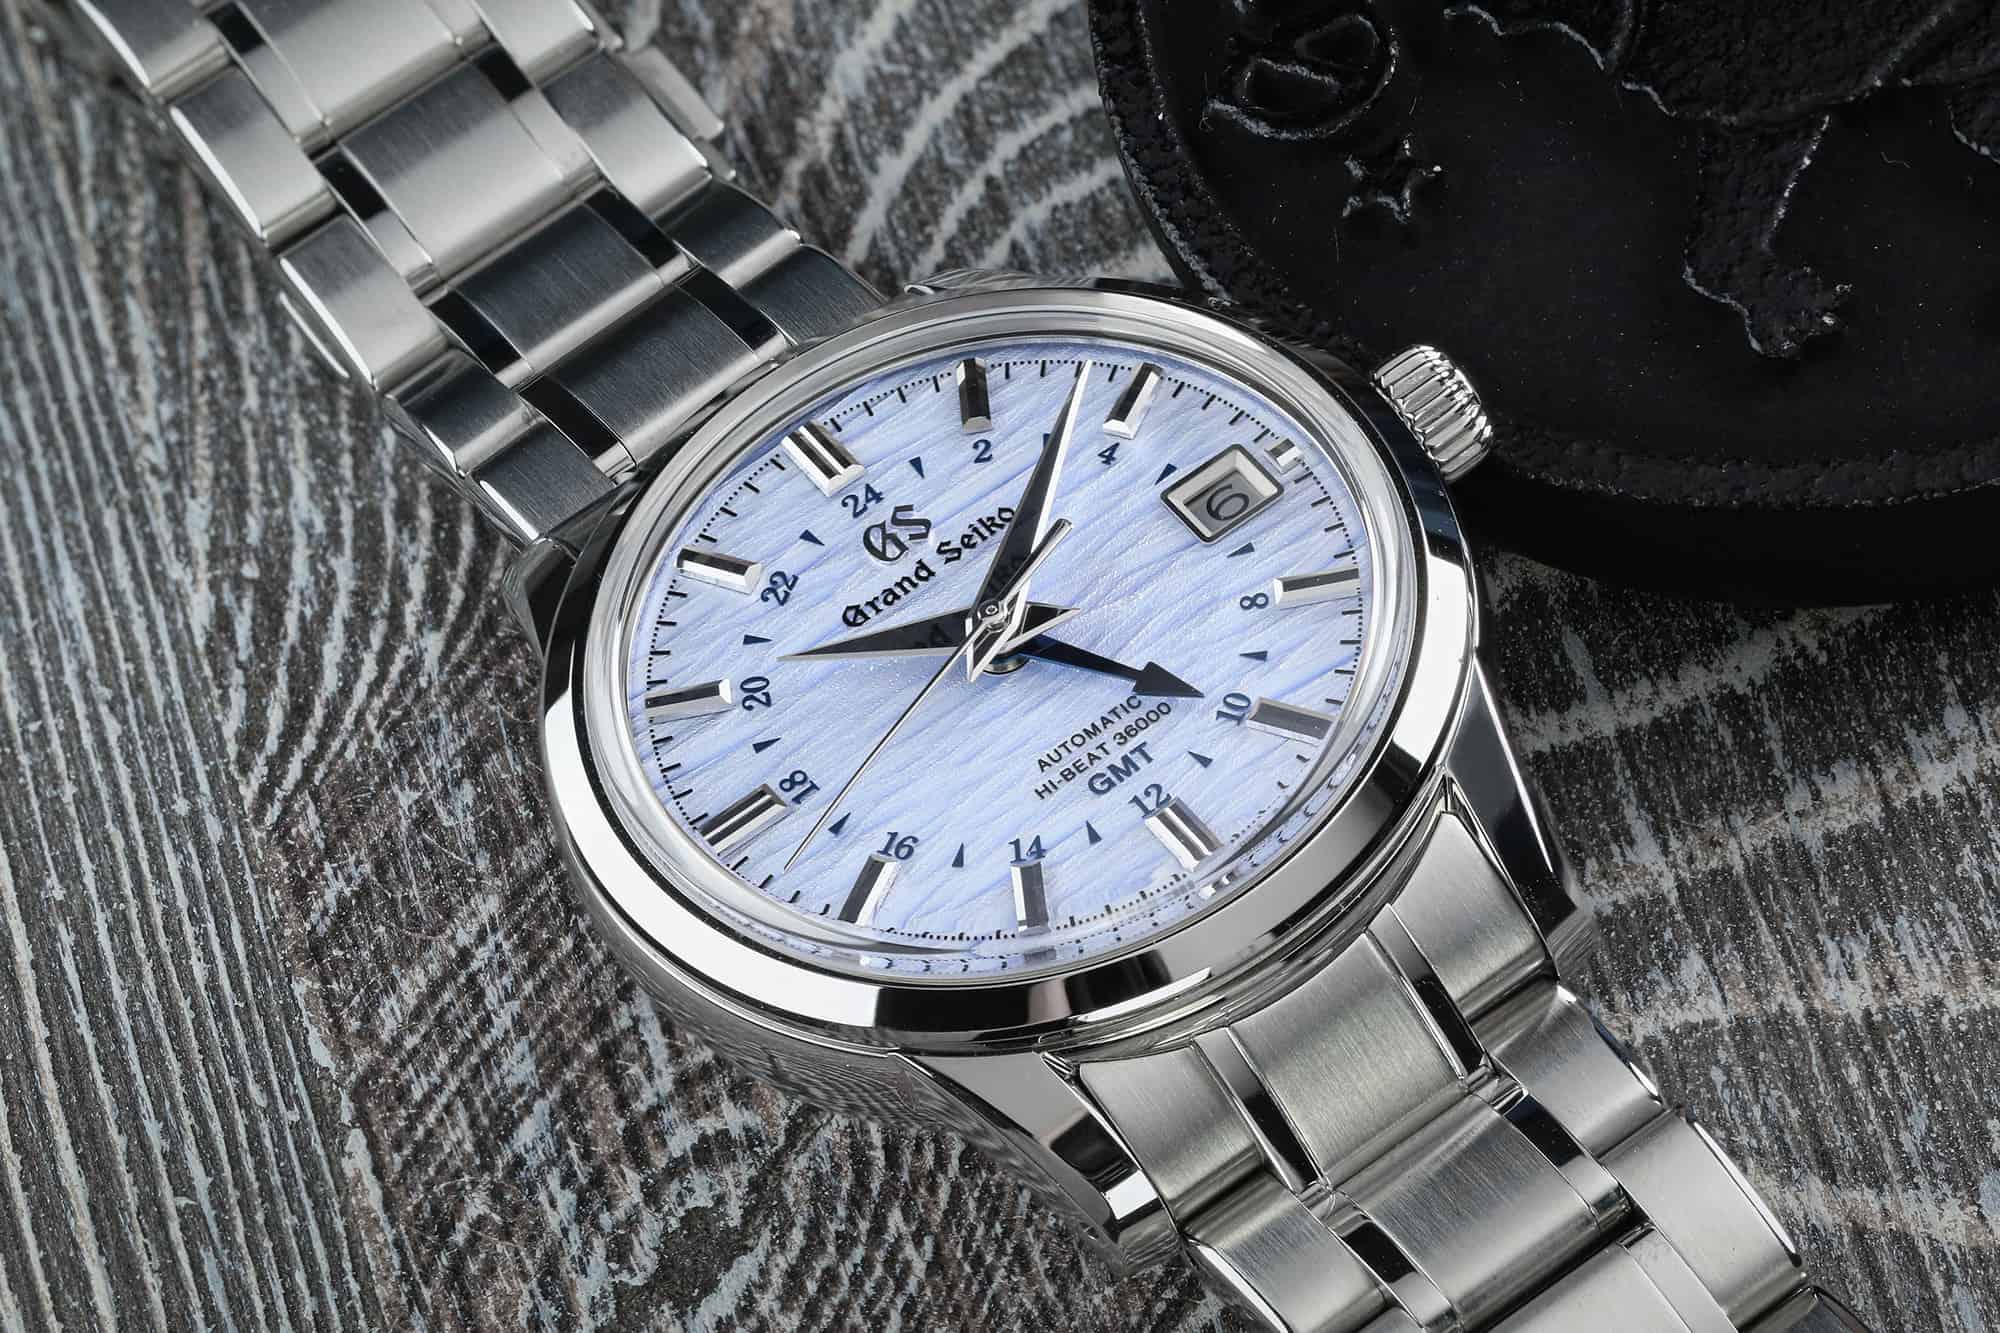 Grand Seiko Introduces a New Series of GMT Watches Based on the Changing  Seasons - Worn & Wound